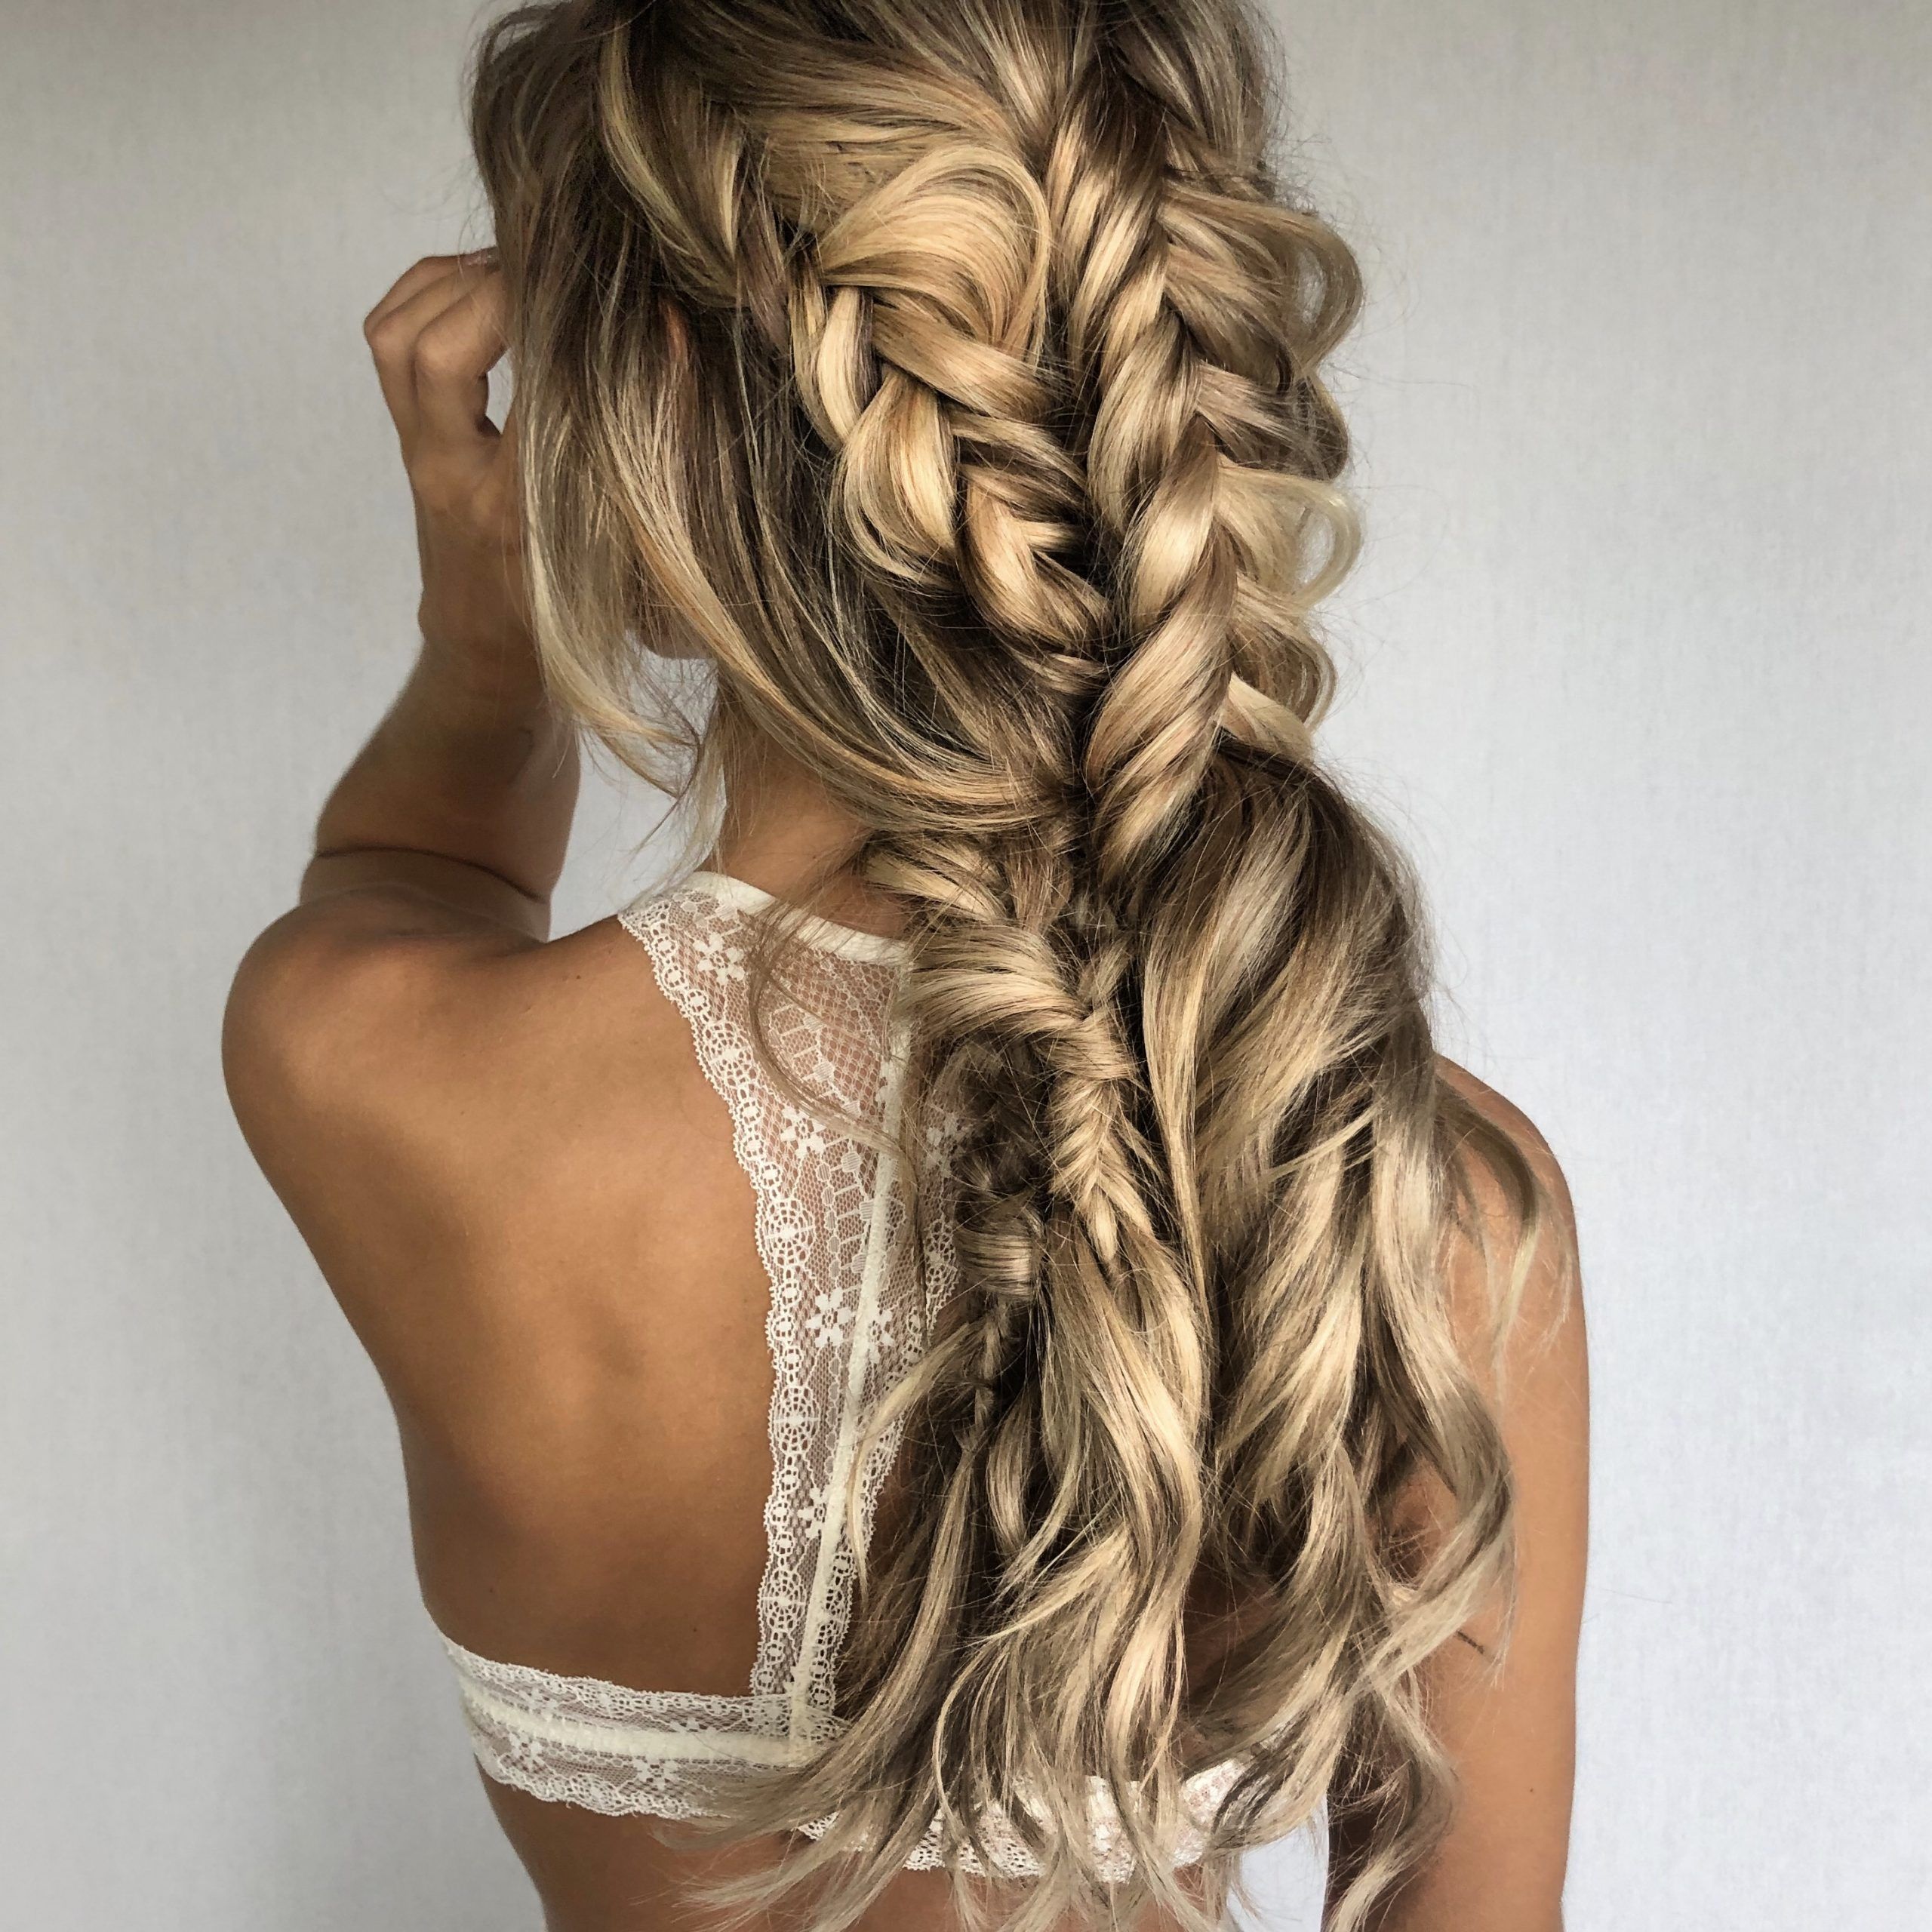 20 Boho Braids Hairstyles That Are Absolutely Gorgeous In Fashionable Fantastic Side Braid Hairstyles (Gallery 6 of 20)